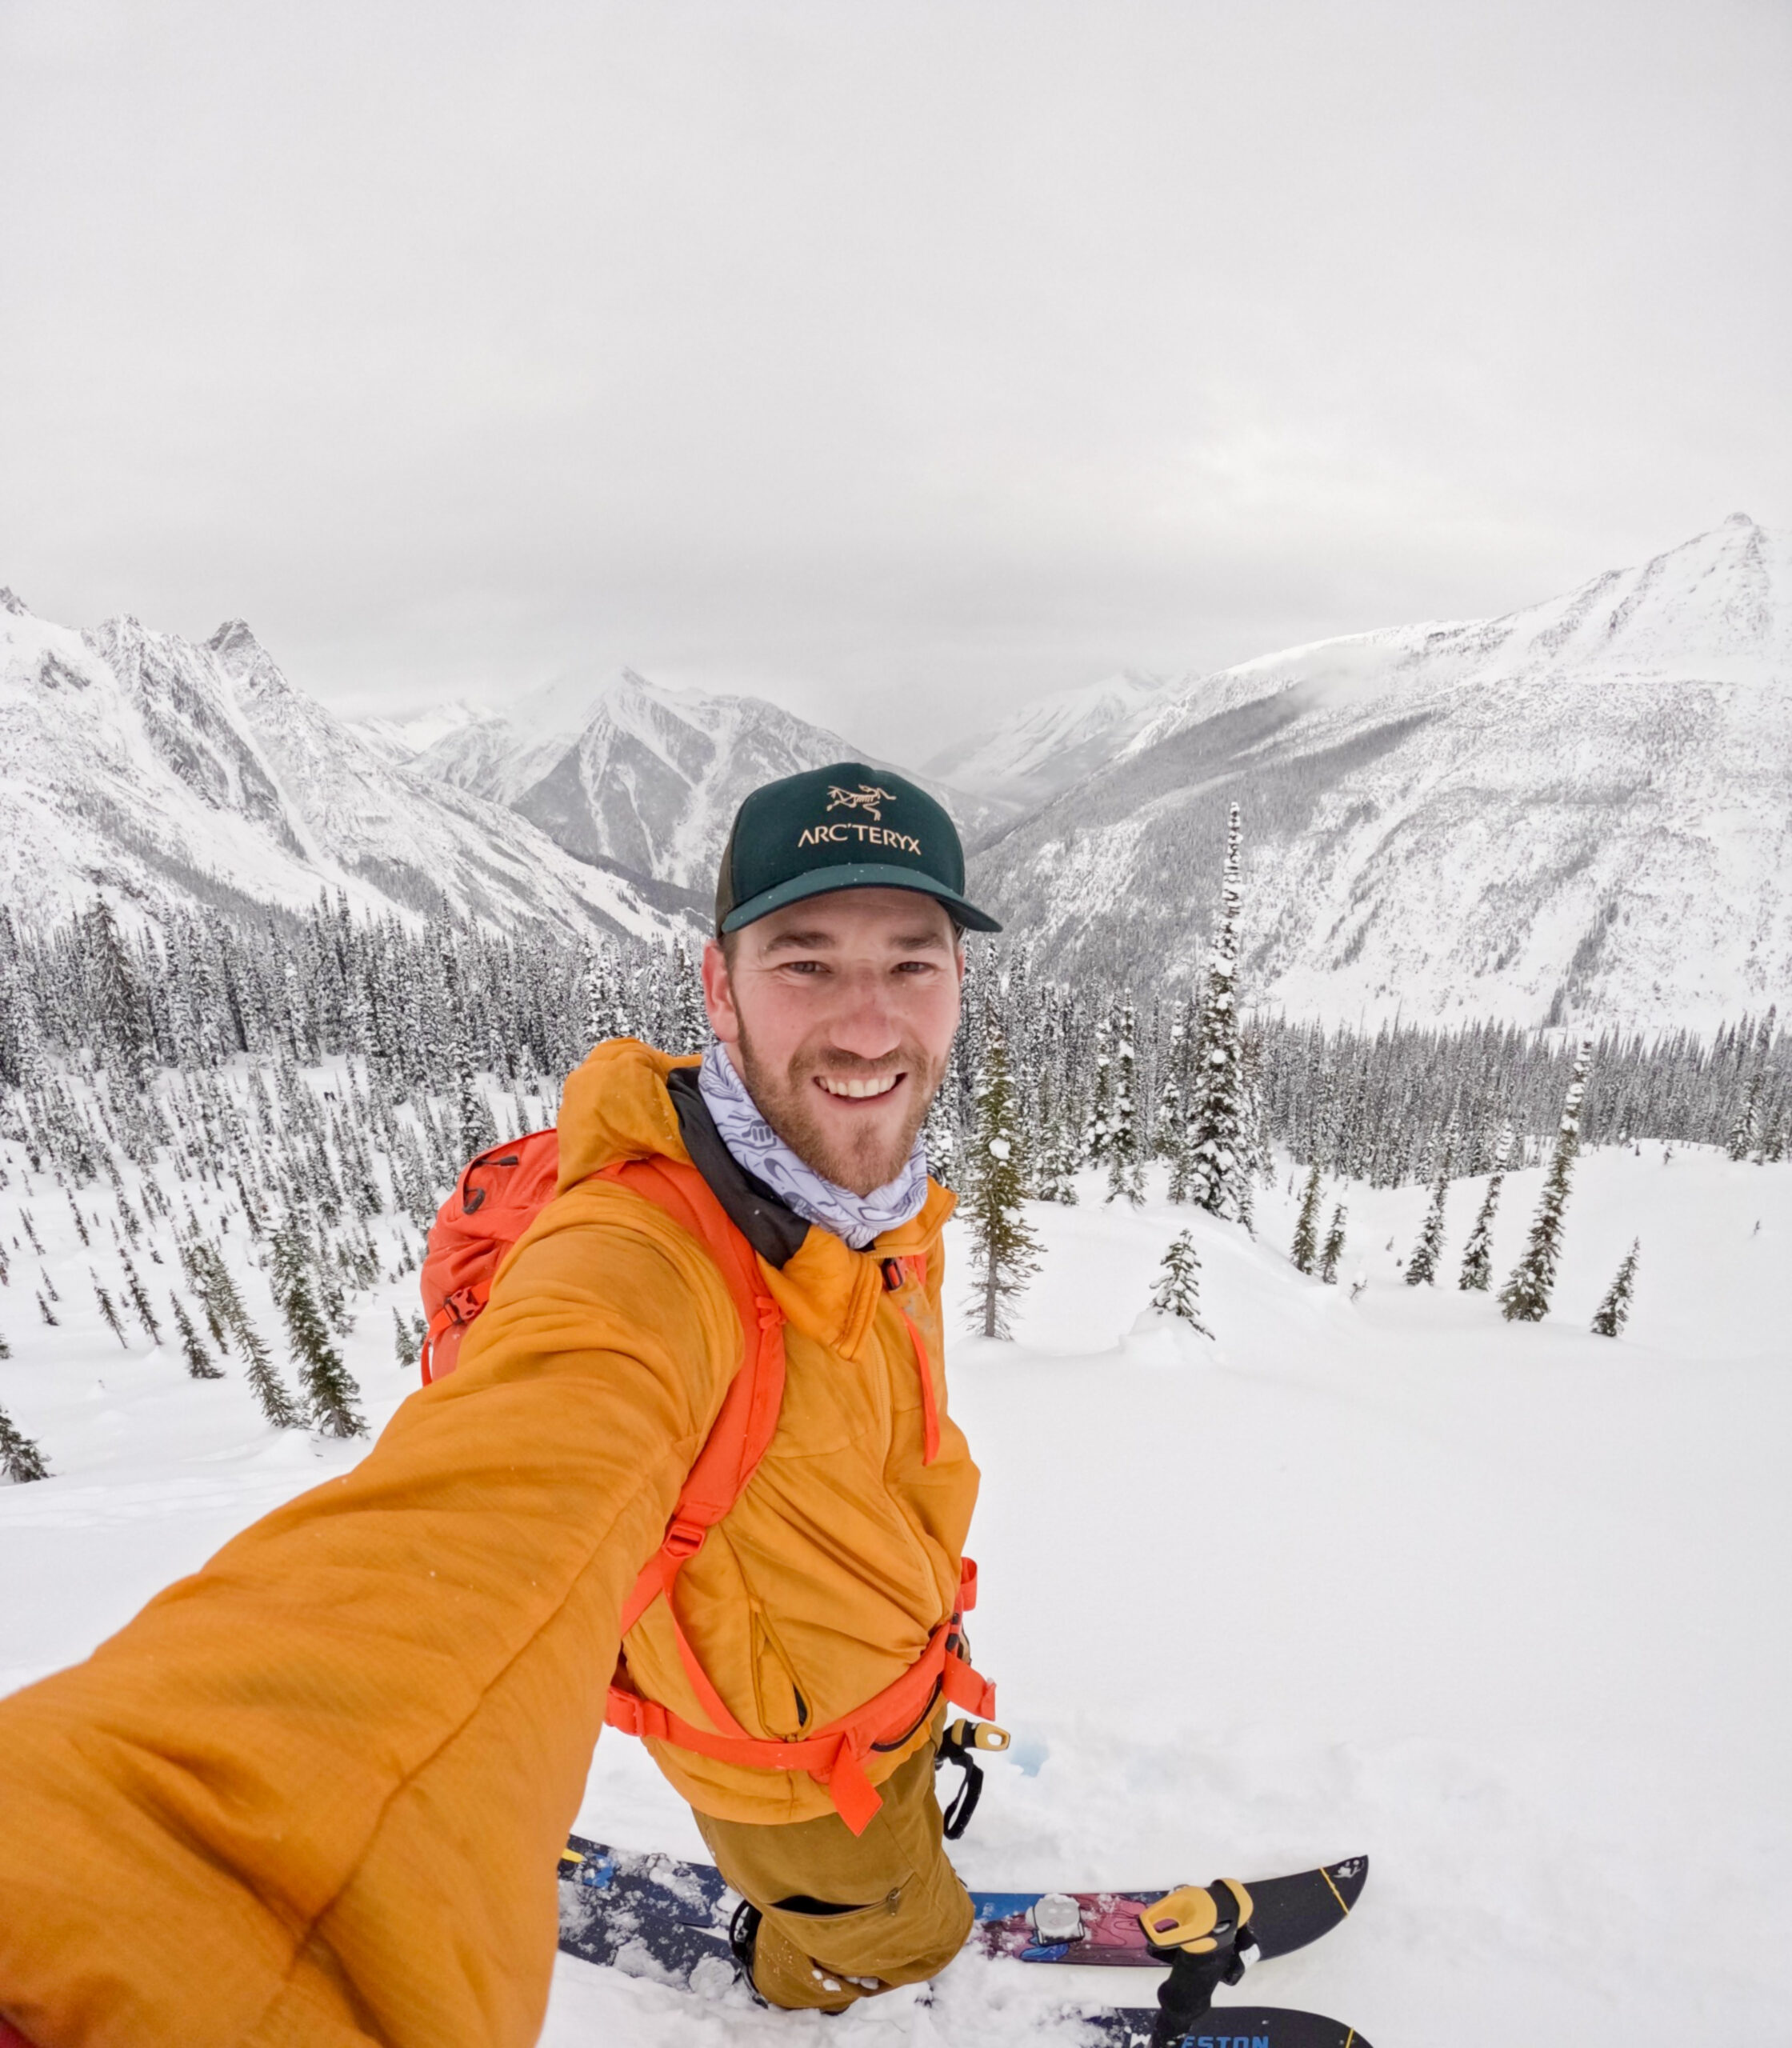 Cameron ski touring in Rogers Pass